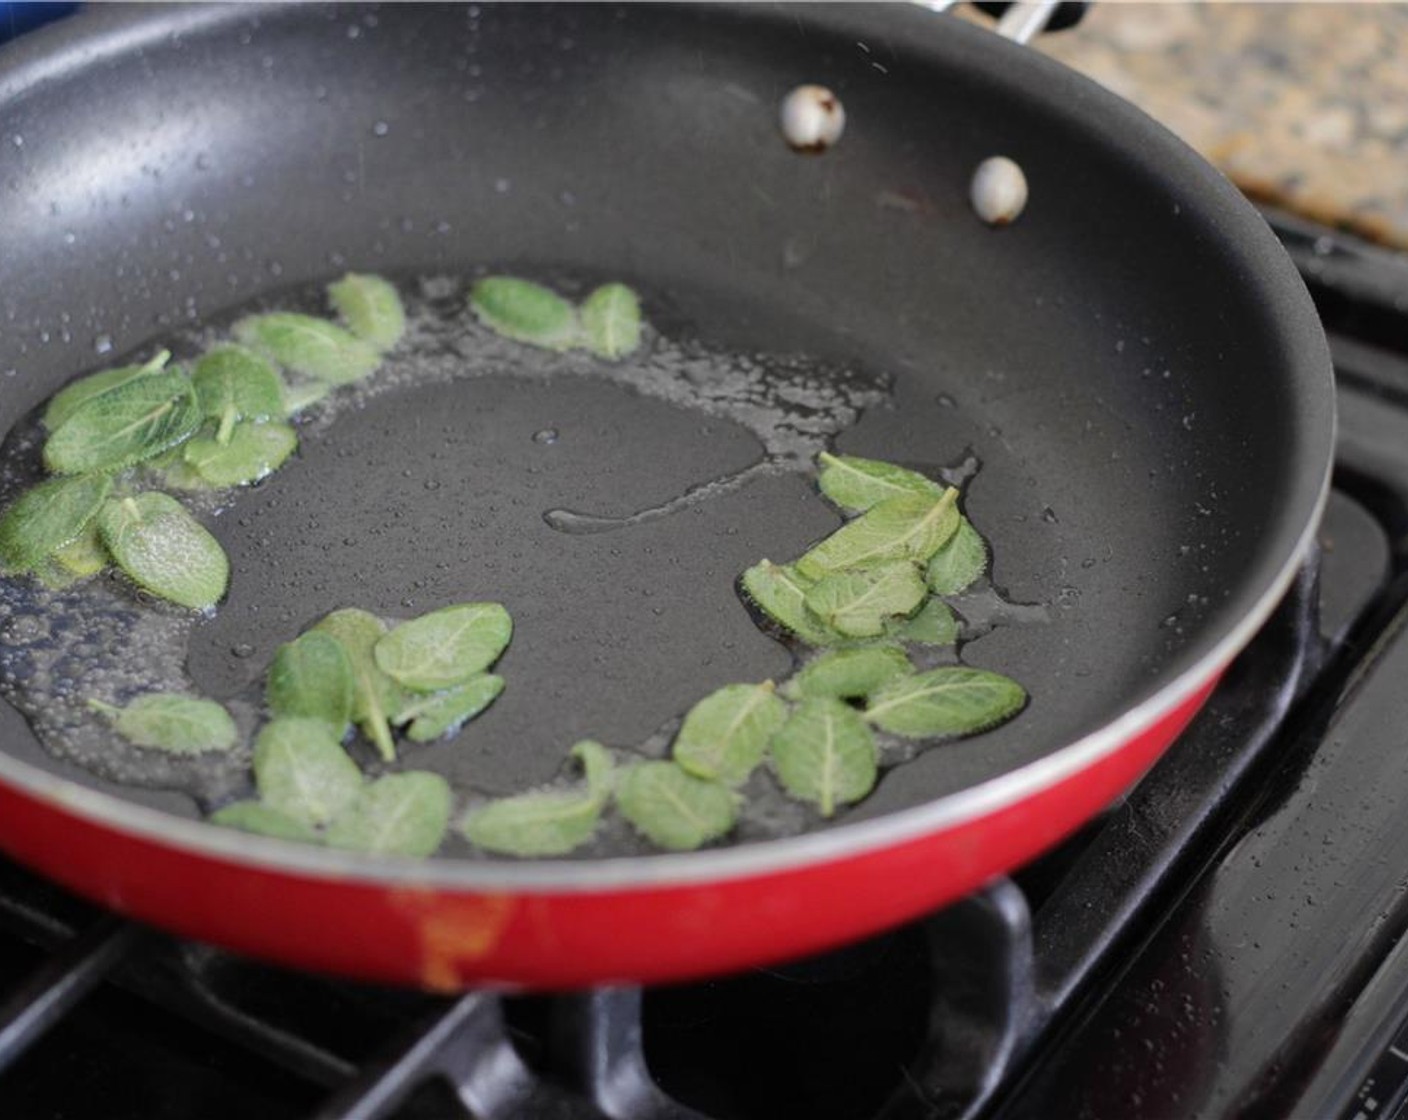 step 7 When the oil is hot, toss the sage leaves into the pan. Let the sage sizzle for about 3-4 minutes. Remove the leaves with a slotted spoon and set aside on a paper towel to drain.